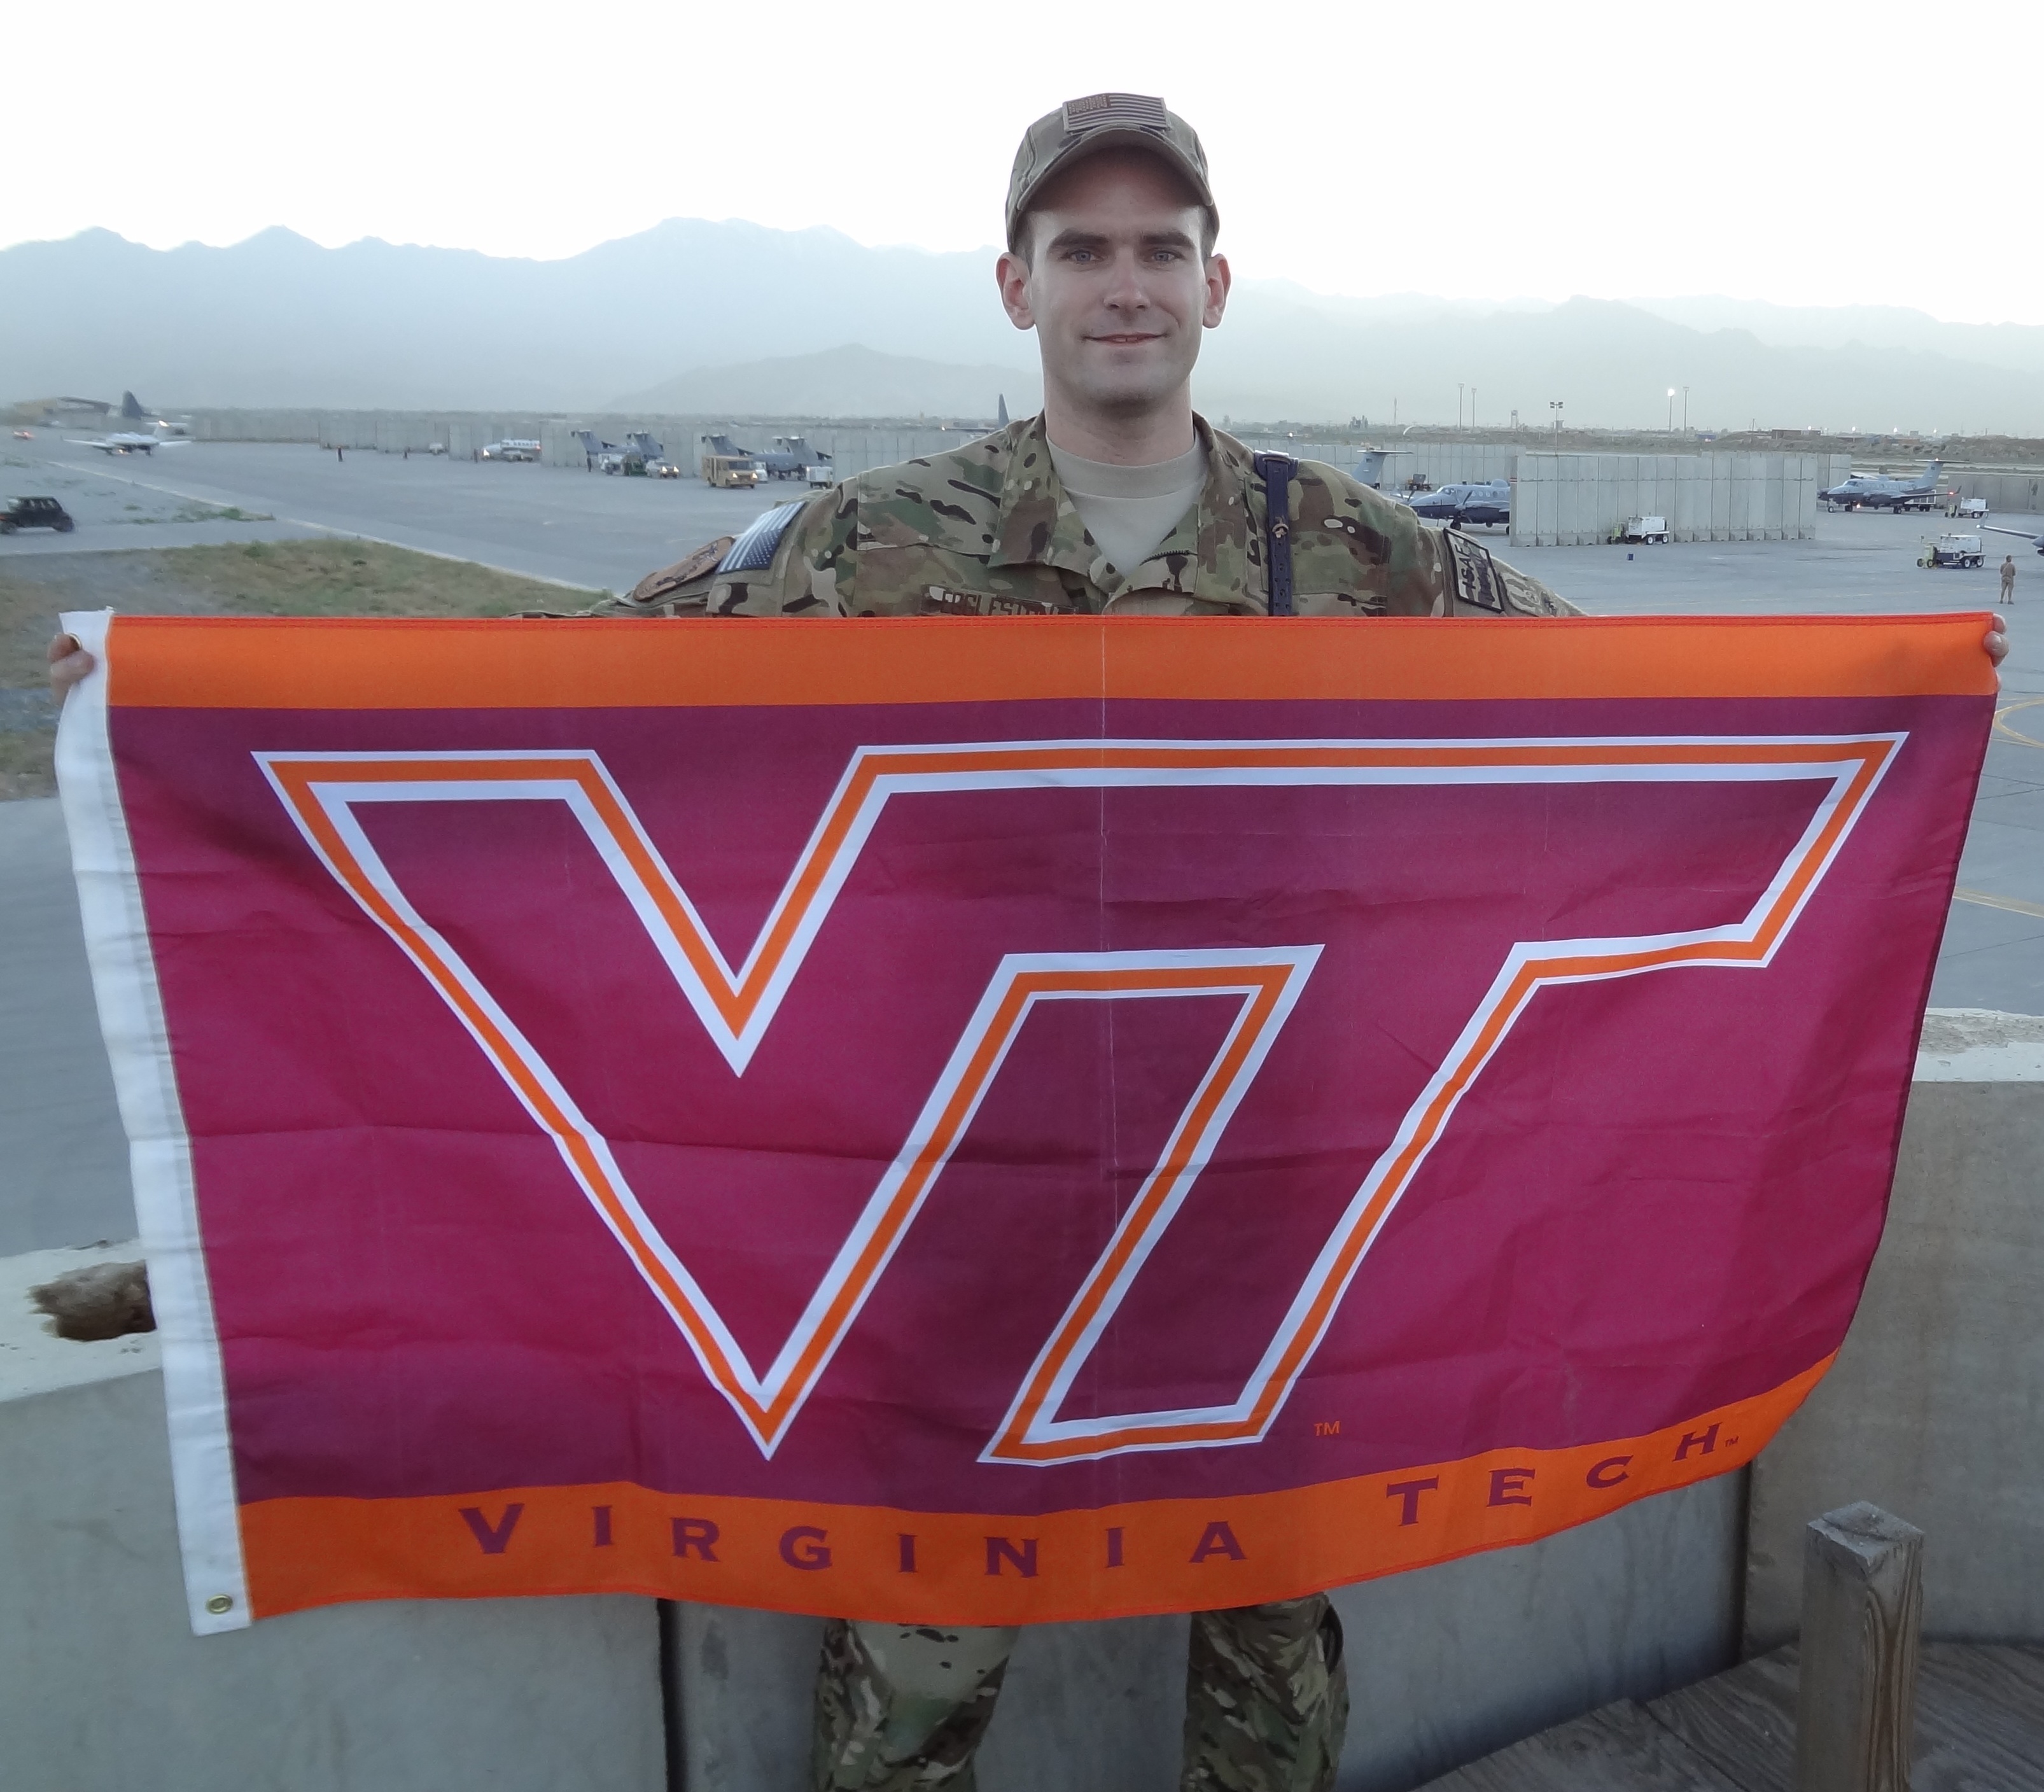 1st Lt. Josh Eggleston, U.S. Air Force, Virginia Tech Corps of Cadets Class of 2009 at Bagram Air Field, Afghanistan